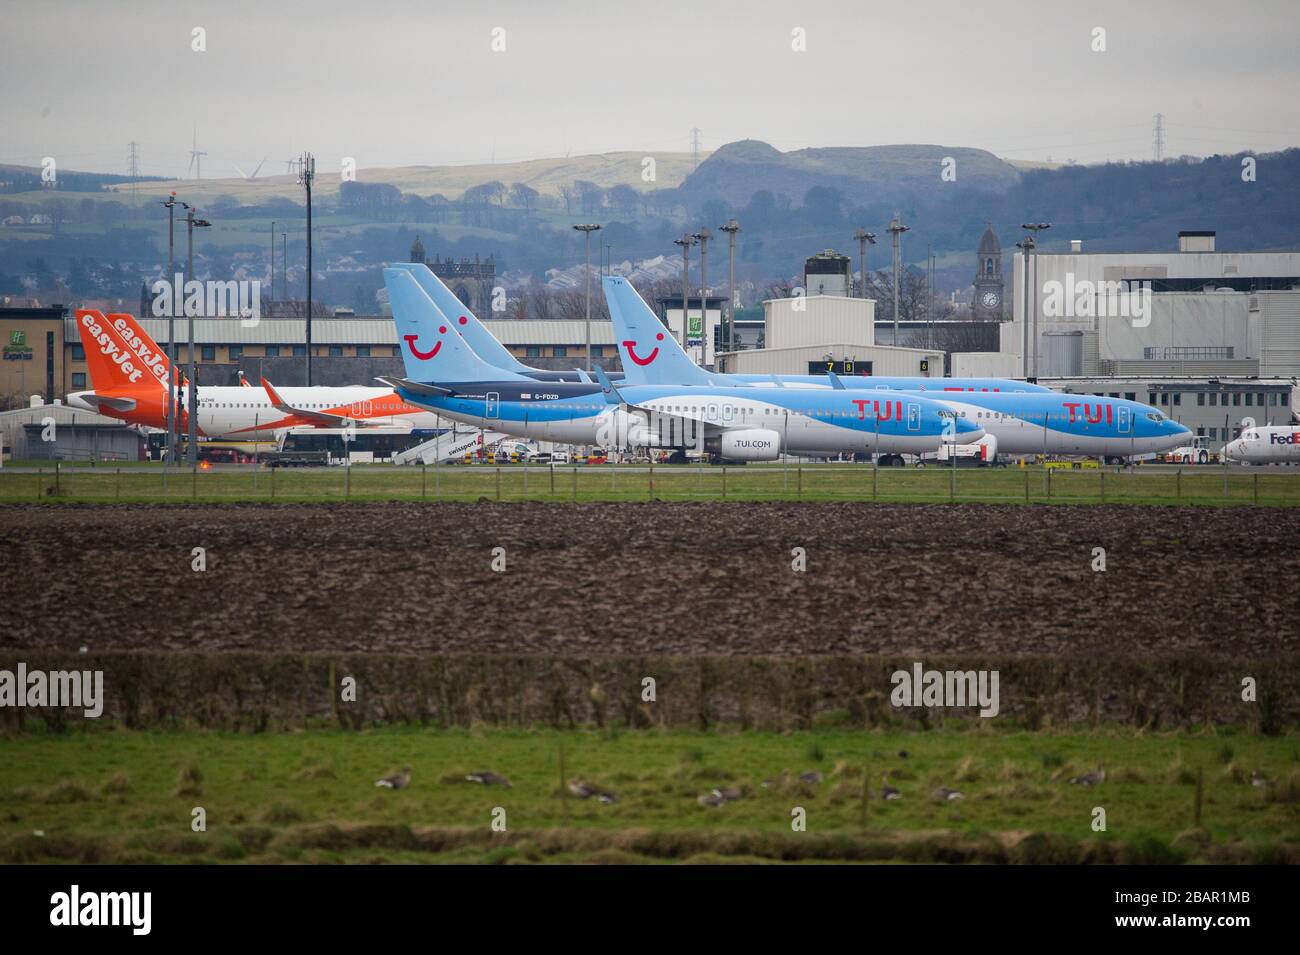 Glasgow, UK. 27 March 2020. Pictured: Grounded TUI planes at Glasgow Airport.  The Coronavirus Pandemic has been responsible for the UK shutdown aviation bringing Glasgow Airport to look more like a ghost town. Credit: Colin Fisher/Alamy Live News. Stock Photo